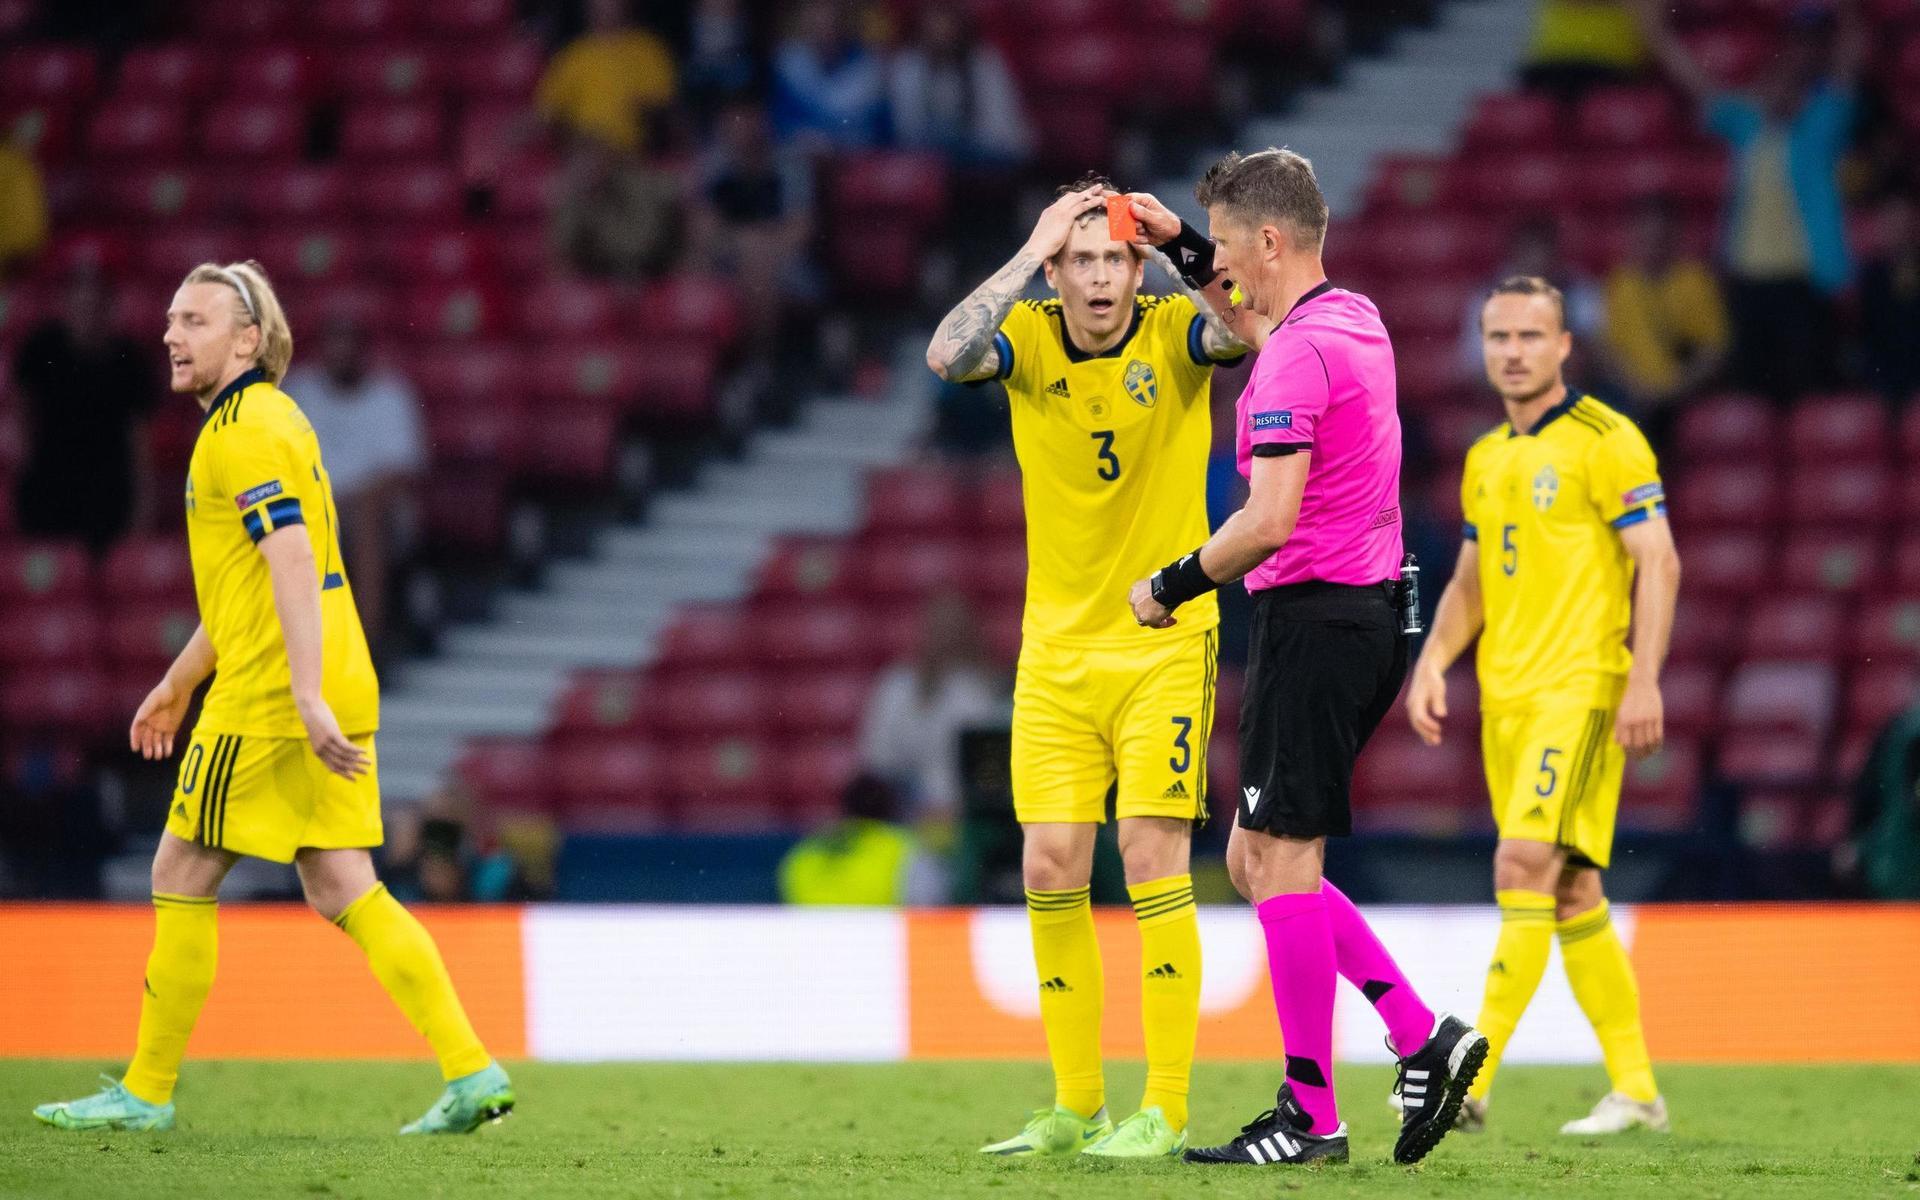 Marcus Danielson (not in picture) of Sweden gets a red card during the UEFA Euro 2020 Football Championship round of 16 match between Sweden and Ukraina on June 29, 2021 in Glasgow. 
